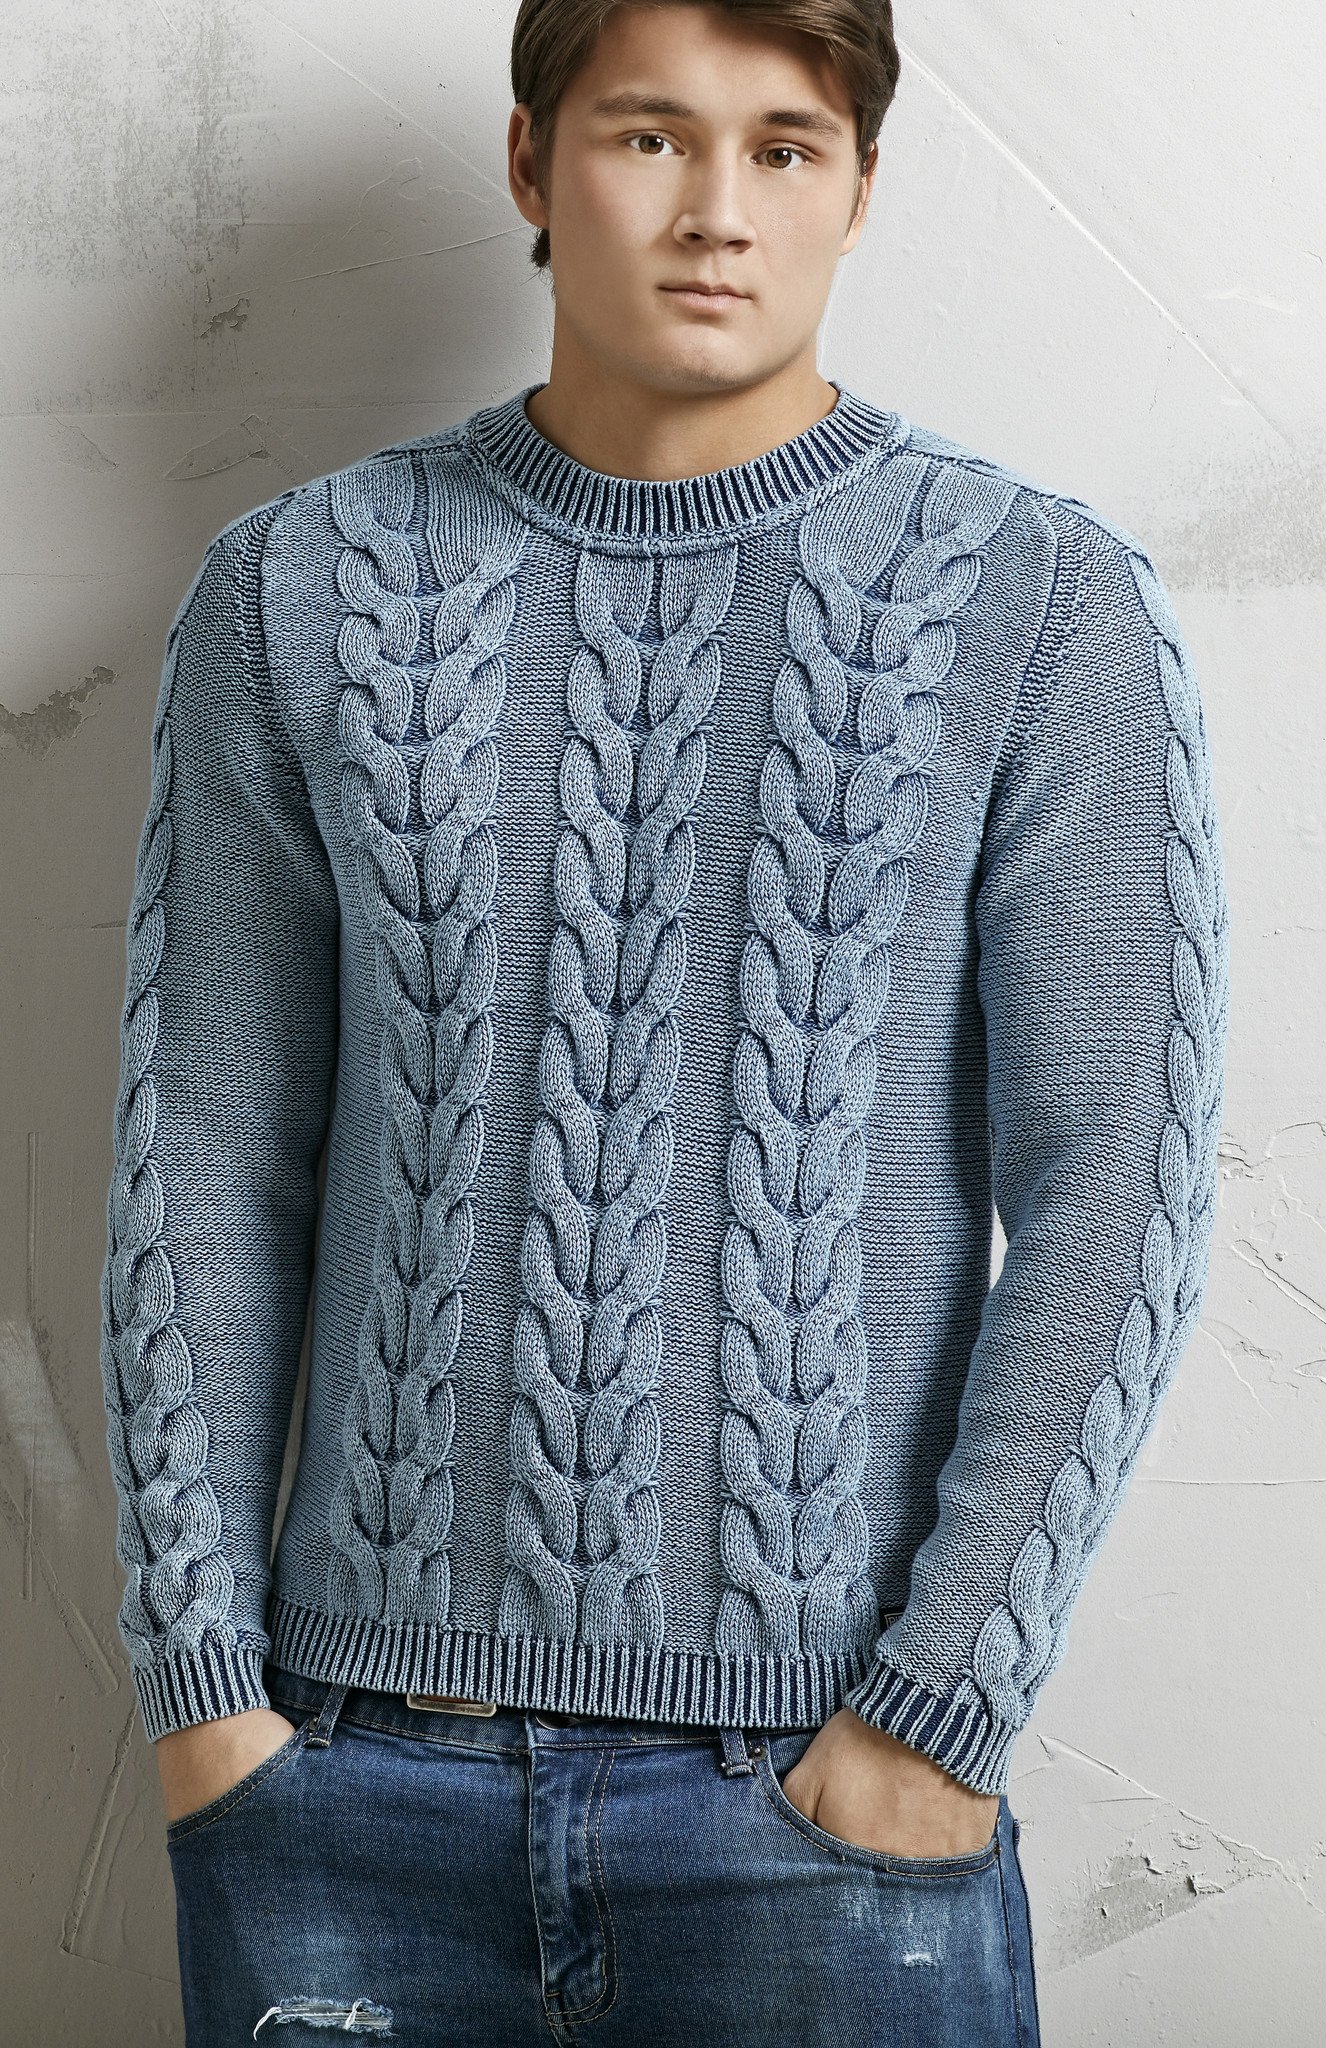 FAT CABLE PULLOVER - LIGHT INDIGO BLUE - Piece of Blue